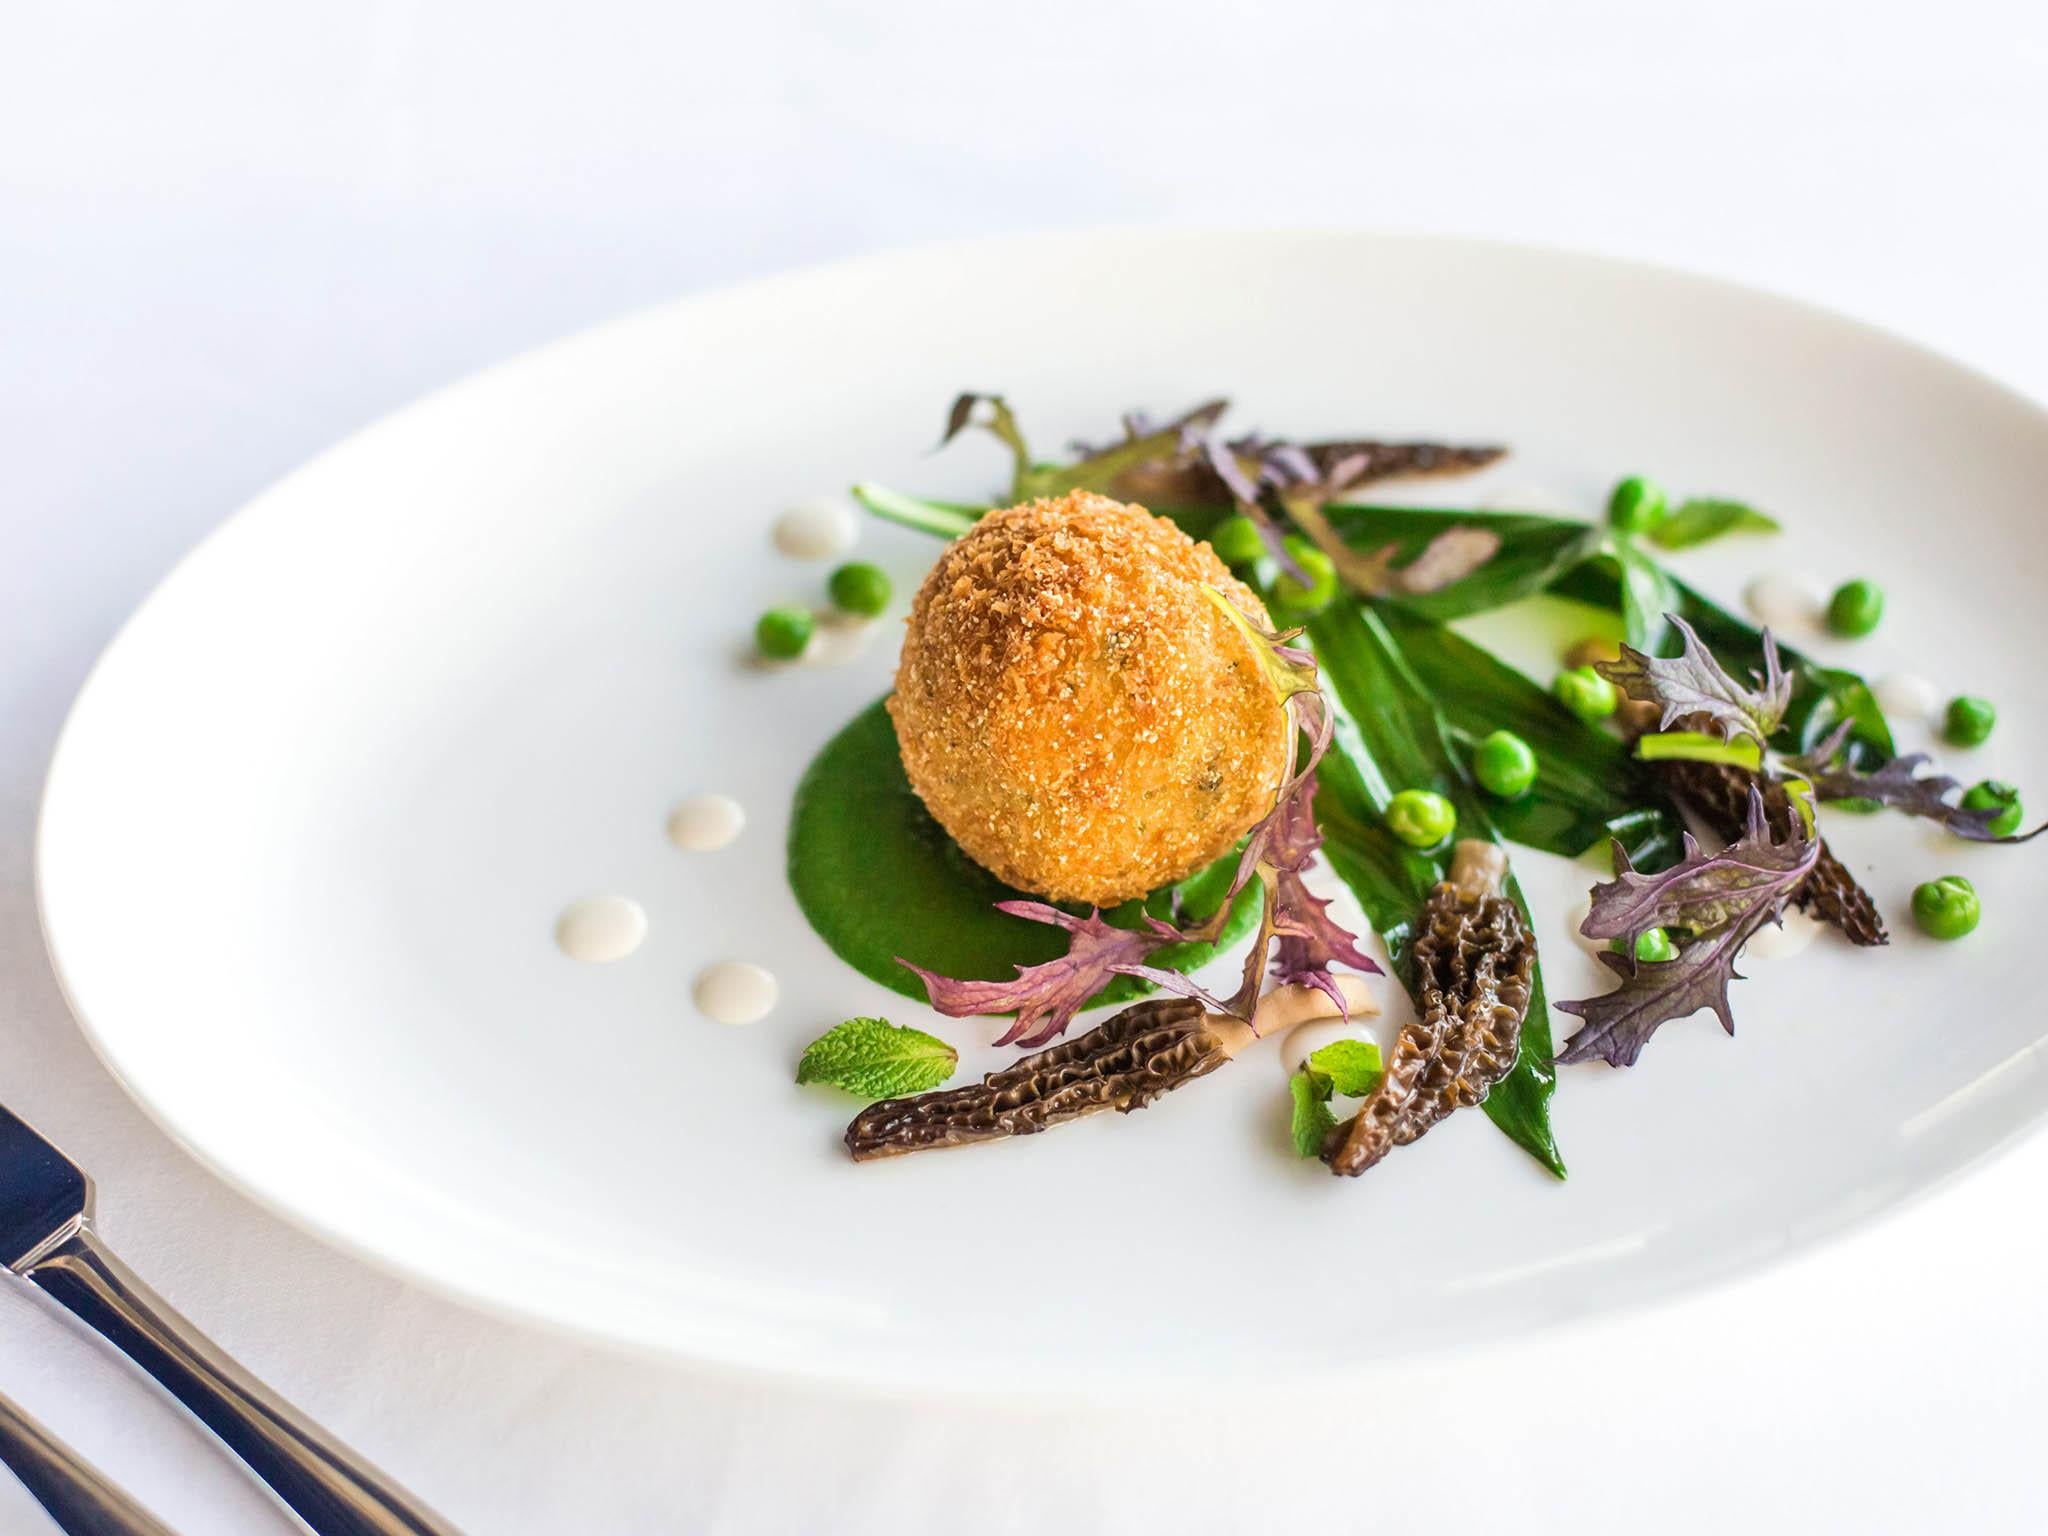 The herb risotto ball with wild garlic, peas and almond cream, £9